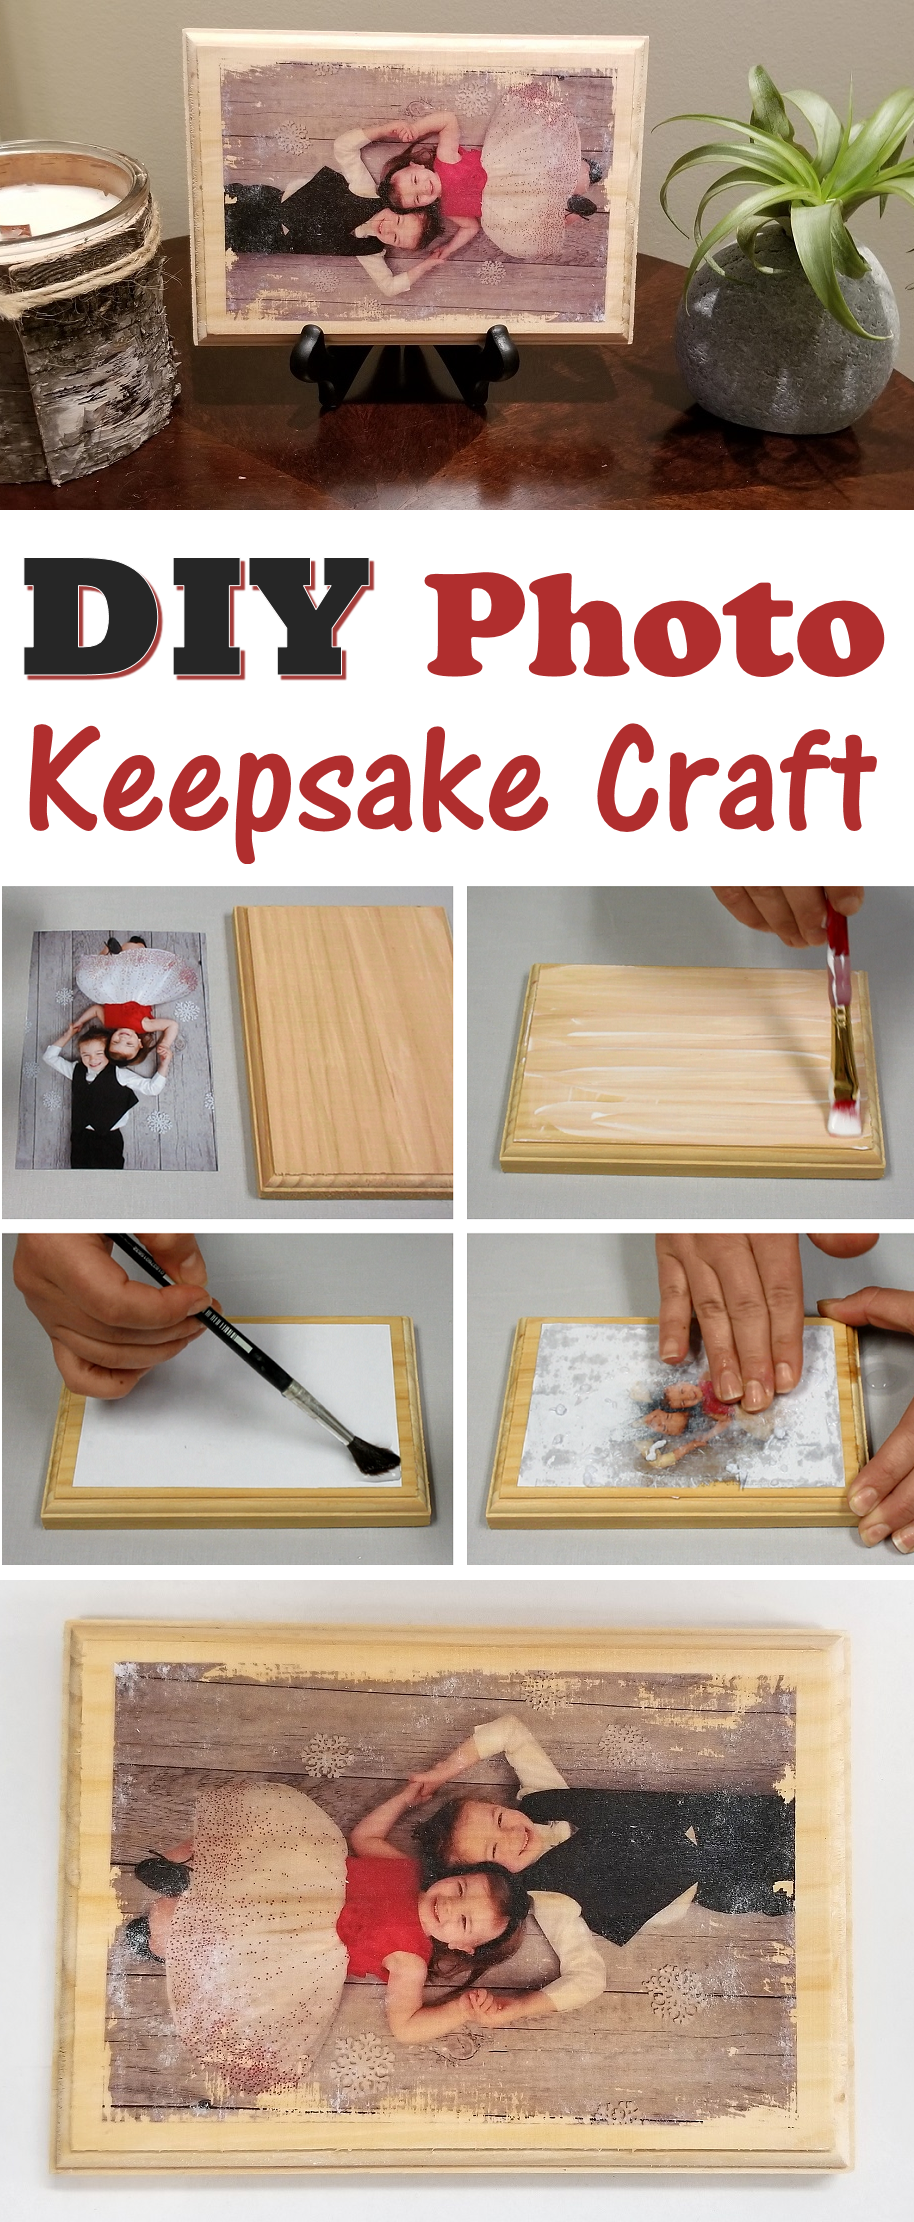 DIY Wood Photo Transfer Keepsake Craft - S&S Blog -   19 diy projects With Wood water ideas